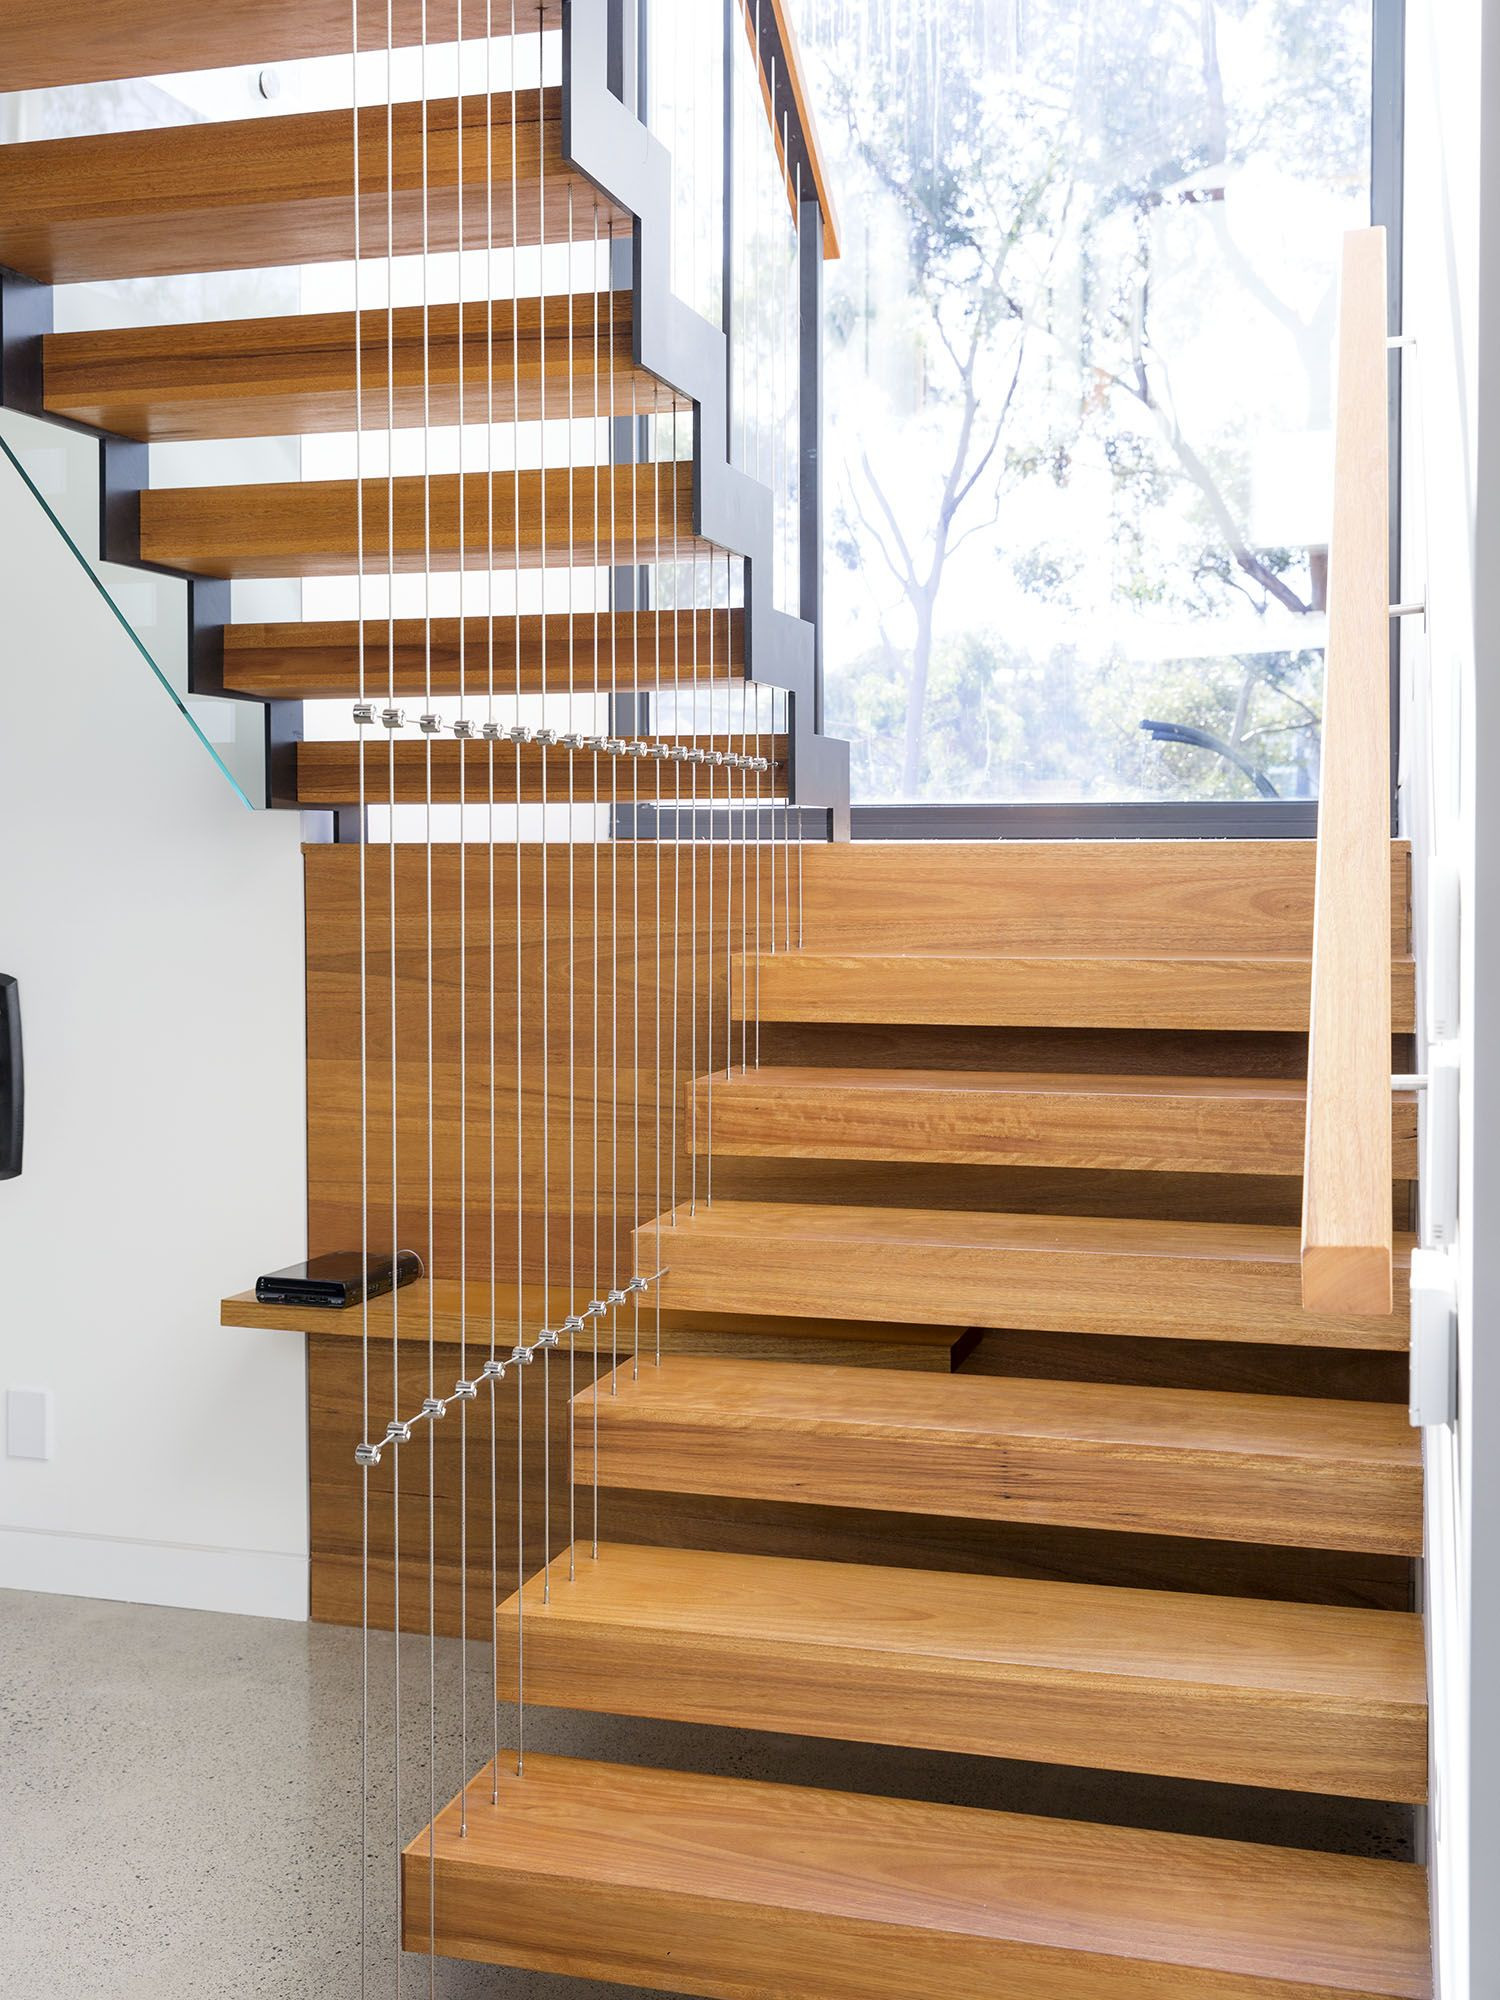 cc hardwood flooring of feature stair floating stair cantilevered steel stringers intended for feature stair floating stair cantilevered steel stringers architecture design interior